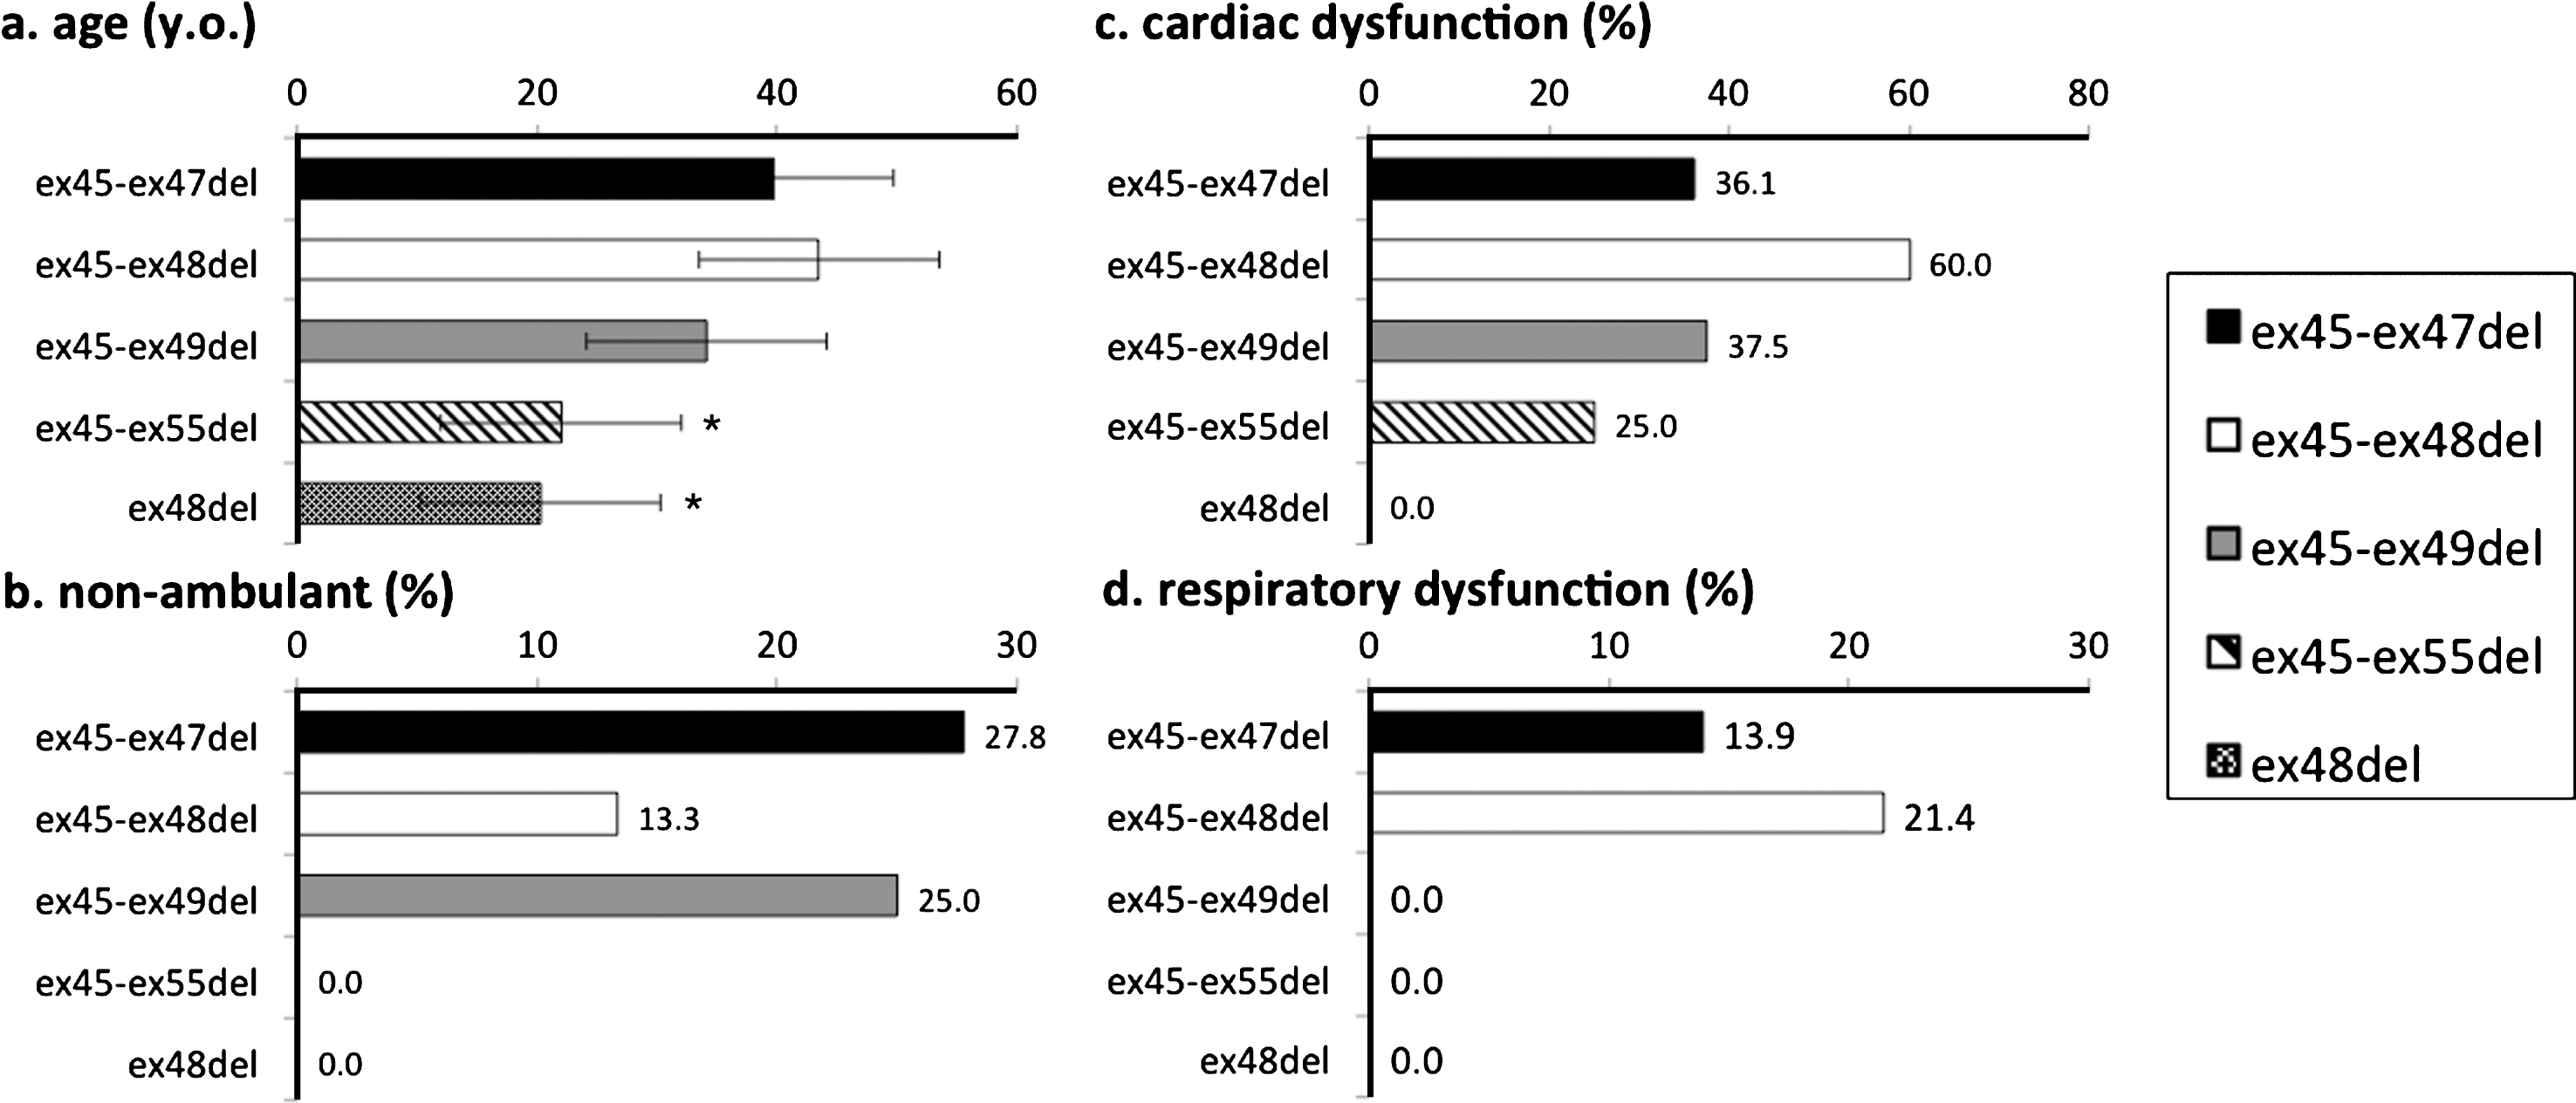 Genotype-phenotype correlation among common mutations of BMD and IMD. Cardiac dysfunction and respiratory dysfunction were the ratio of numbers of participants with cardiac/respiratory dysfunction carrying each mutation subtended to the entire population of each mutations. *significant difference relative to ex45-47del (p = 0.05). (a) Participant age; only those with ex48del were significantly younger. (b) Proportion of non-ambulant participants; no participants with ex45-55del and ex48del lost ambulation. (c) Proportion of participants with cardiac dysfunction; no significant difference among mutations. (d) Proportion of participants with respiratory dysfunction; a higher proportion of those with ex3-ex7del had respiratory dysfunction.